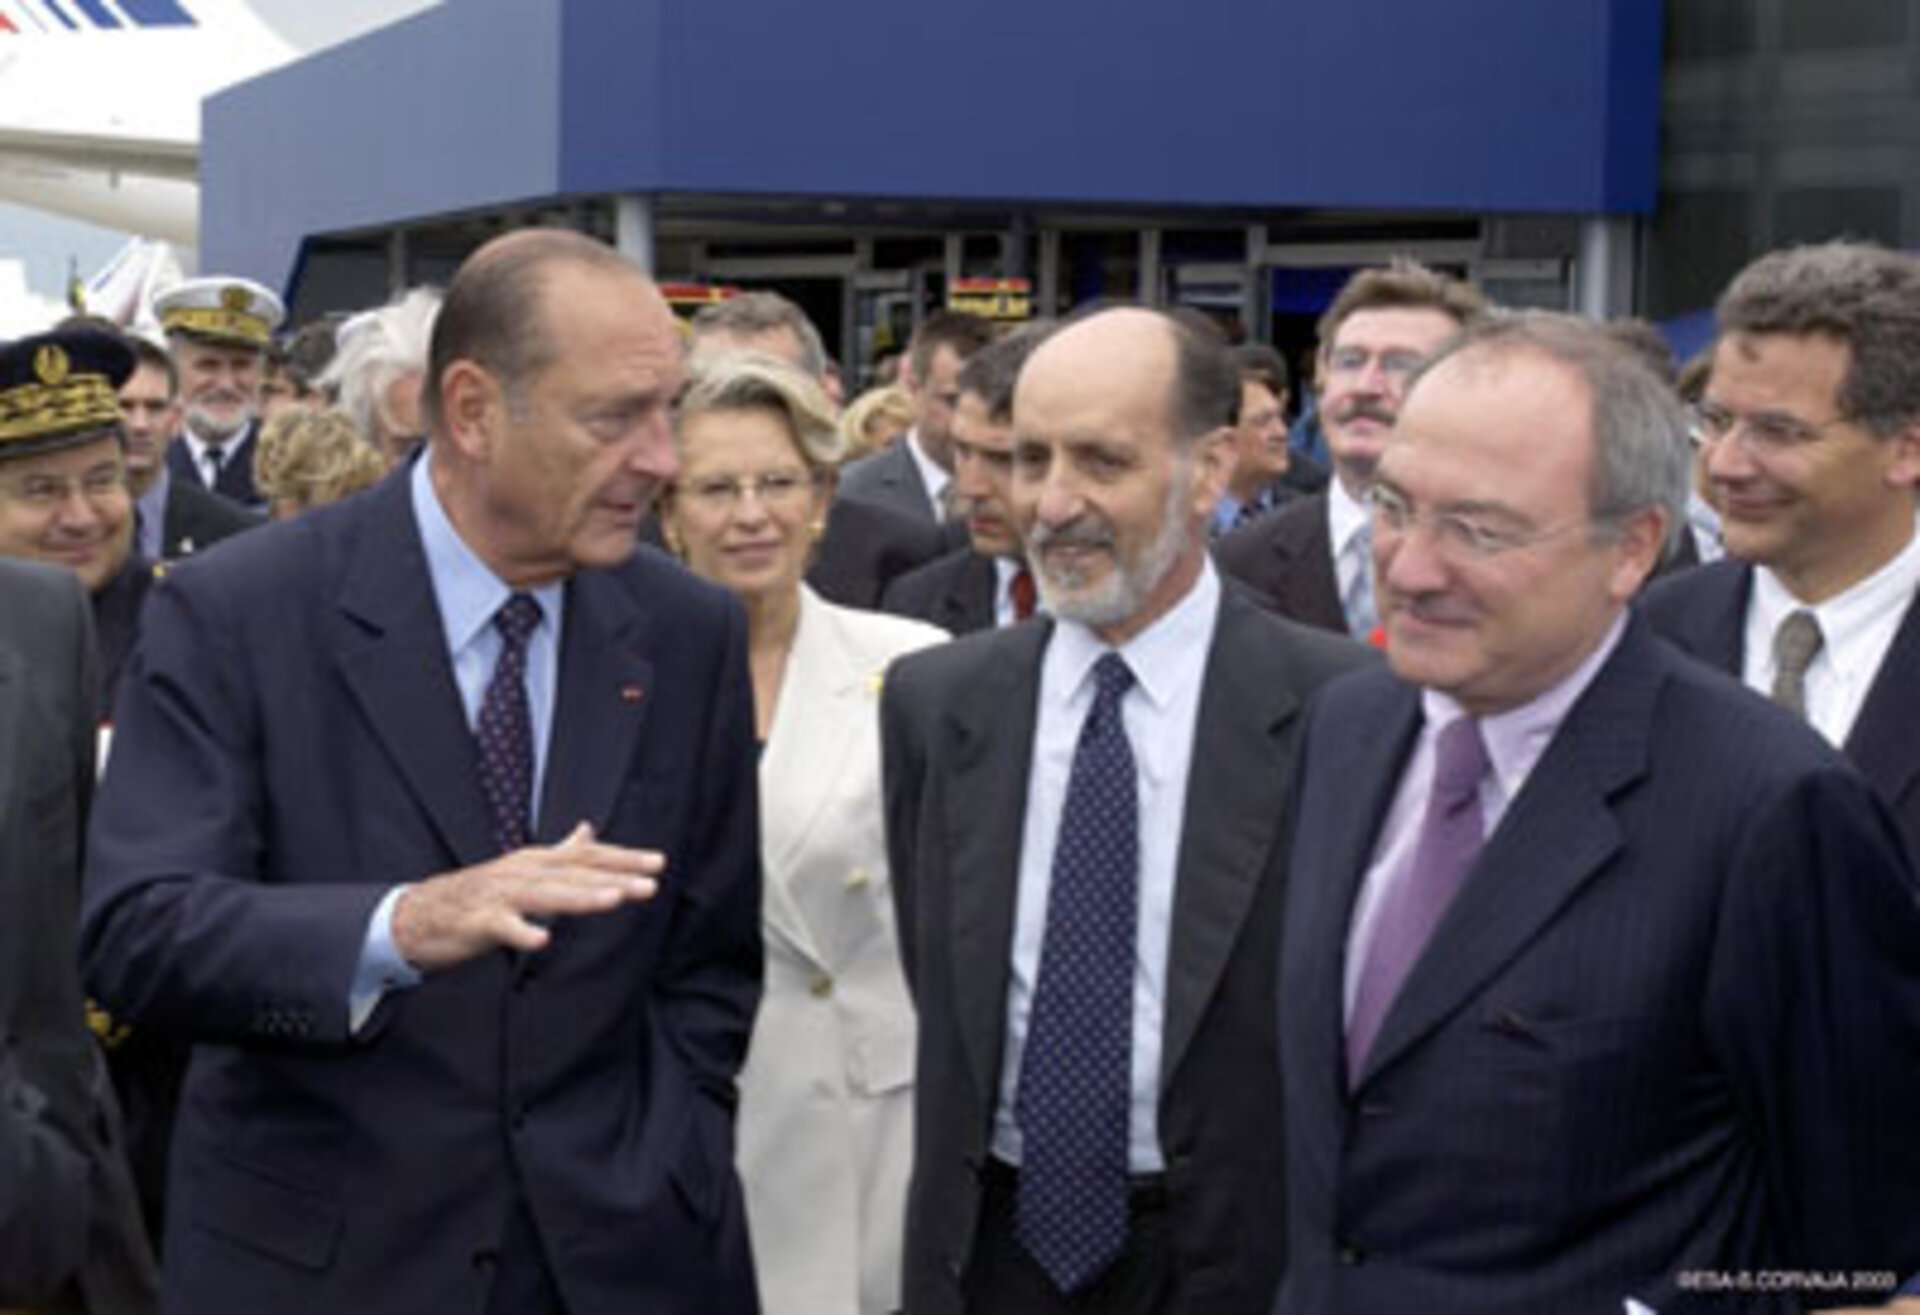 President Chirac of France visits the ESA Pavilion